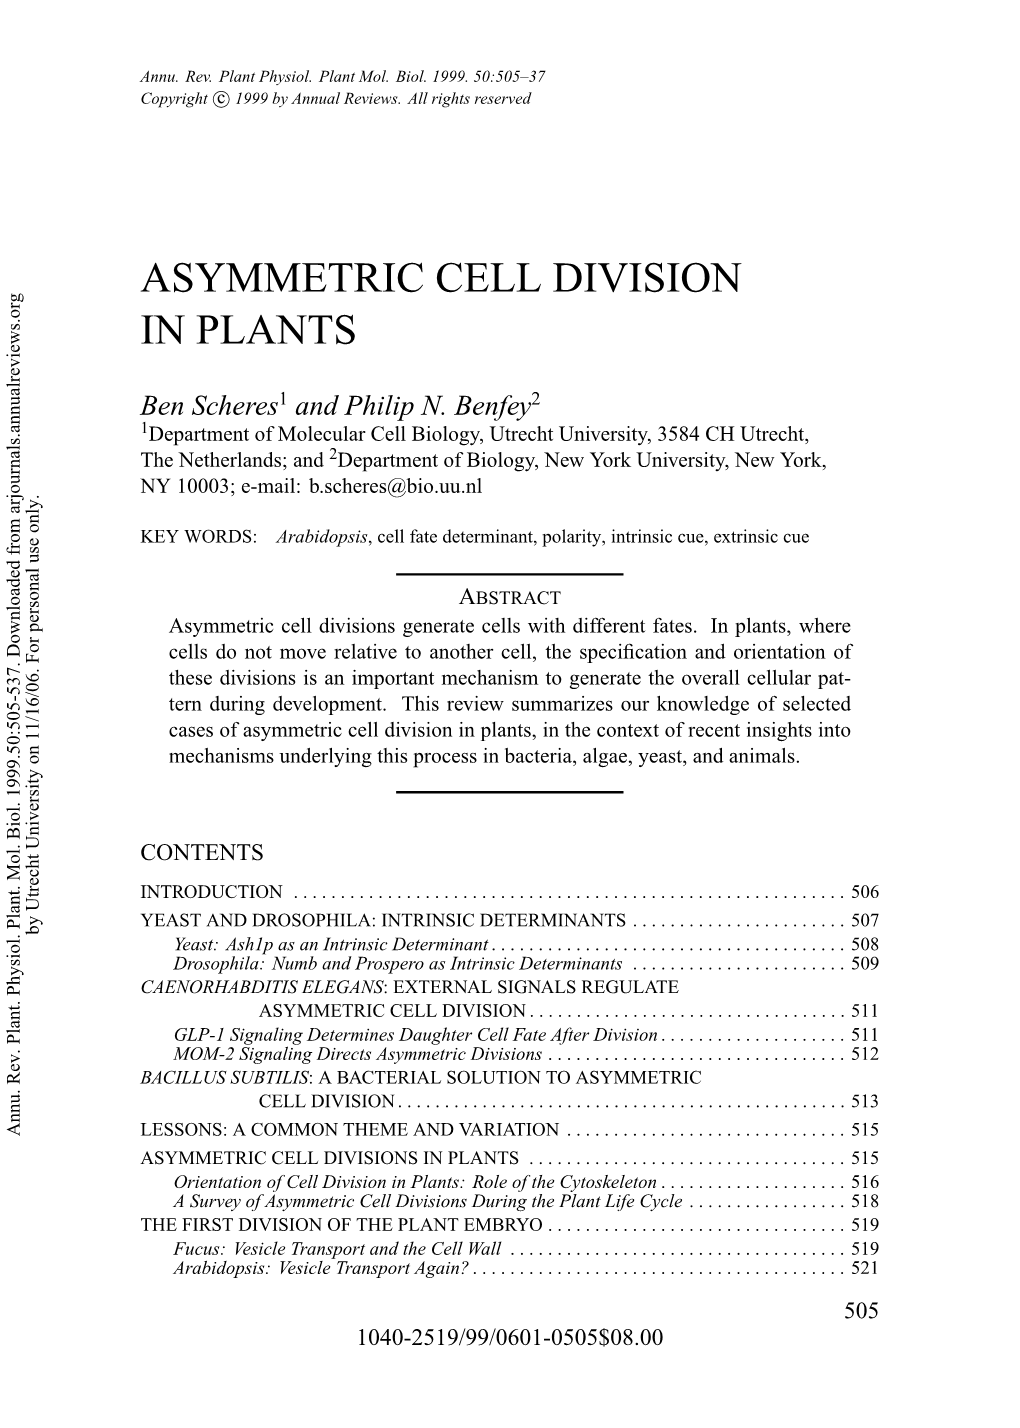 Asymmetric Cell Division in Plants